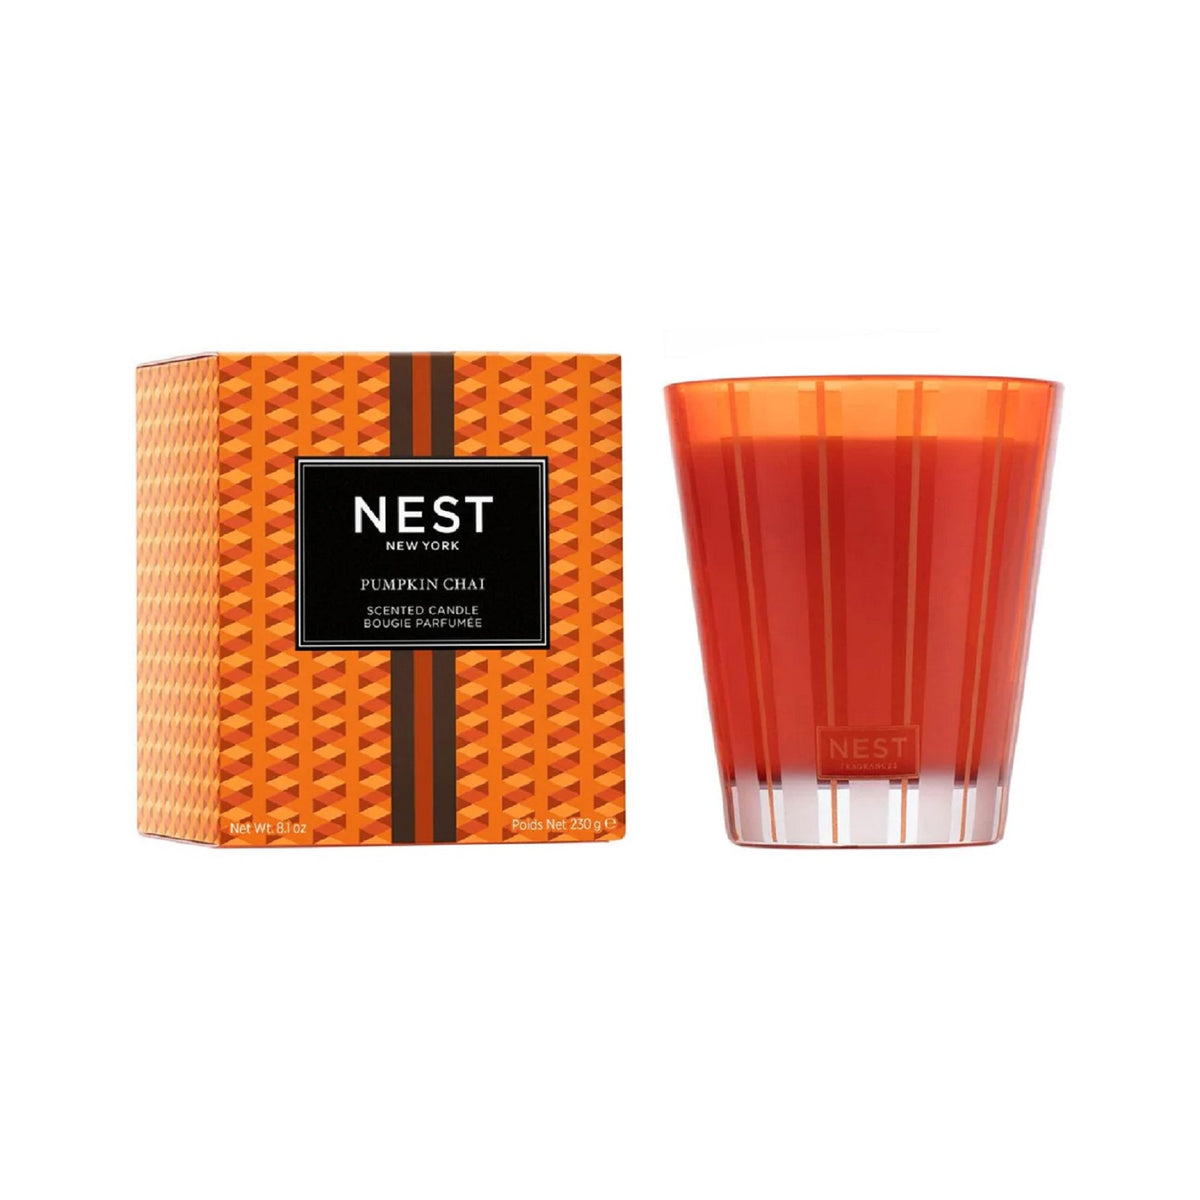 Product Image of Nest New York’s Pumpkin Chai Classic Candle with Box